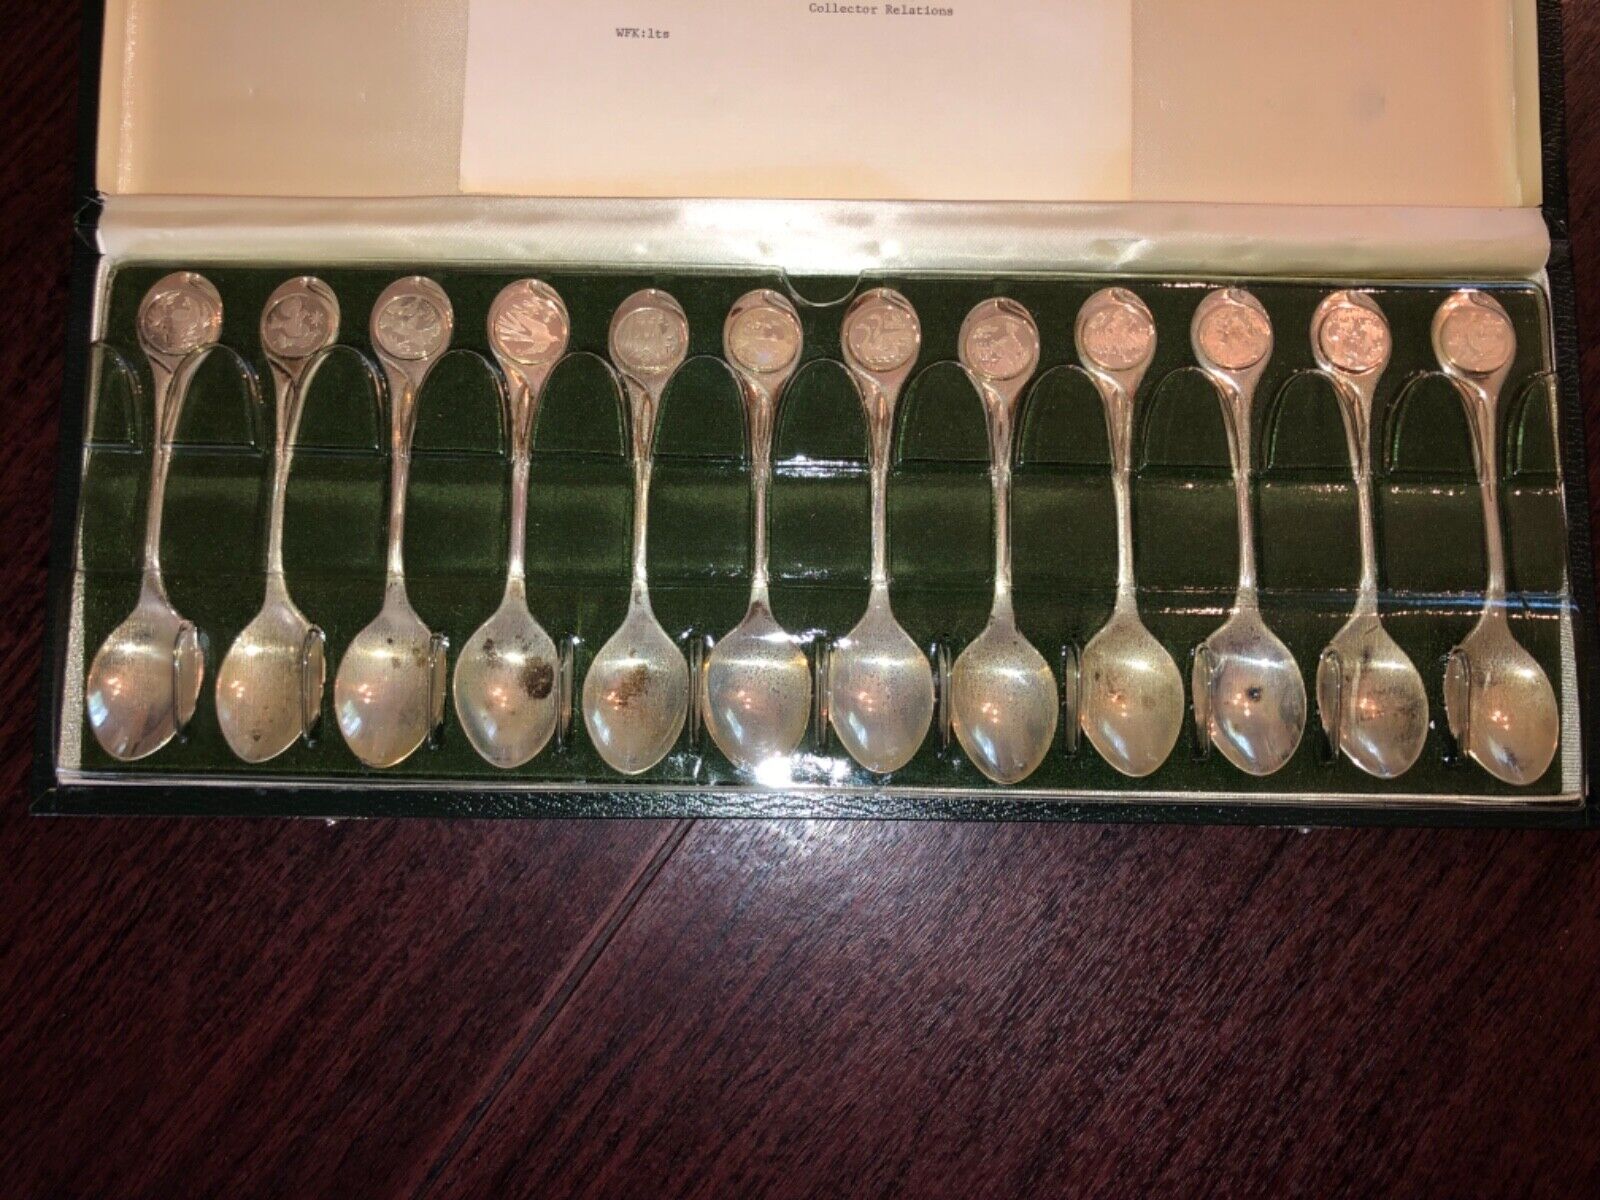 The Franklin Mint set of Twelve Days of Christmas sterling silver teaspoons